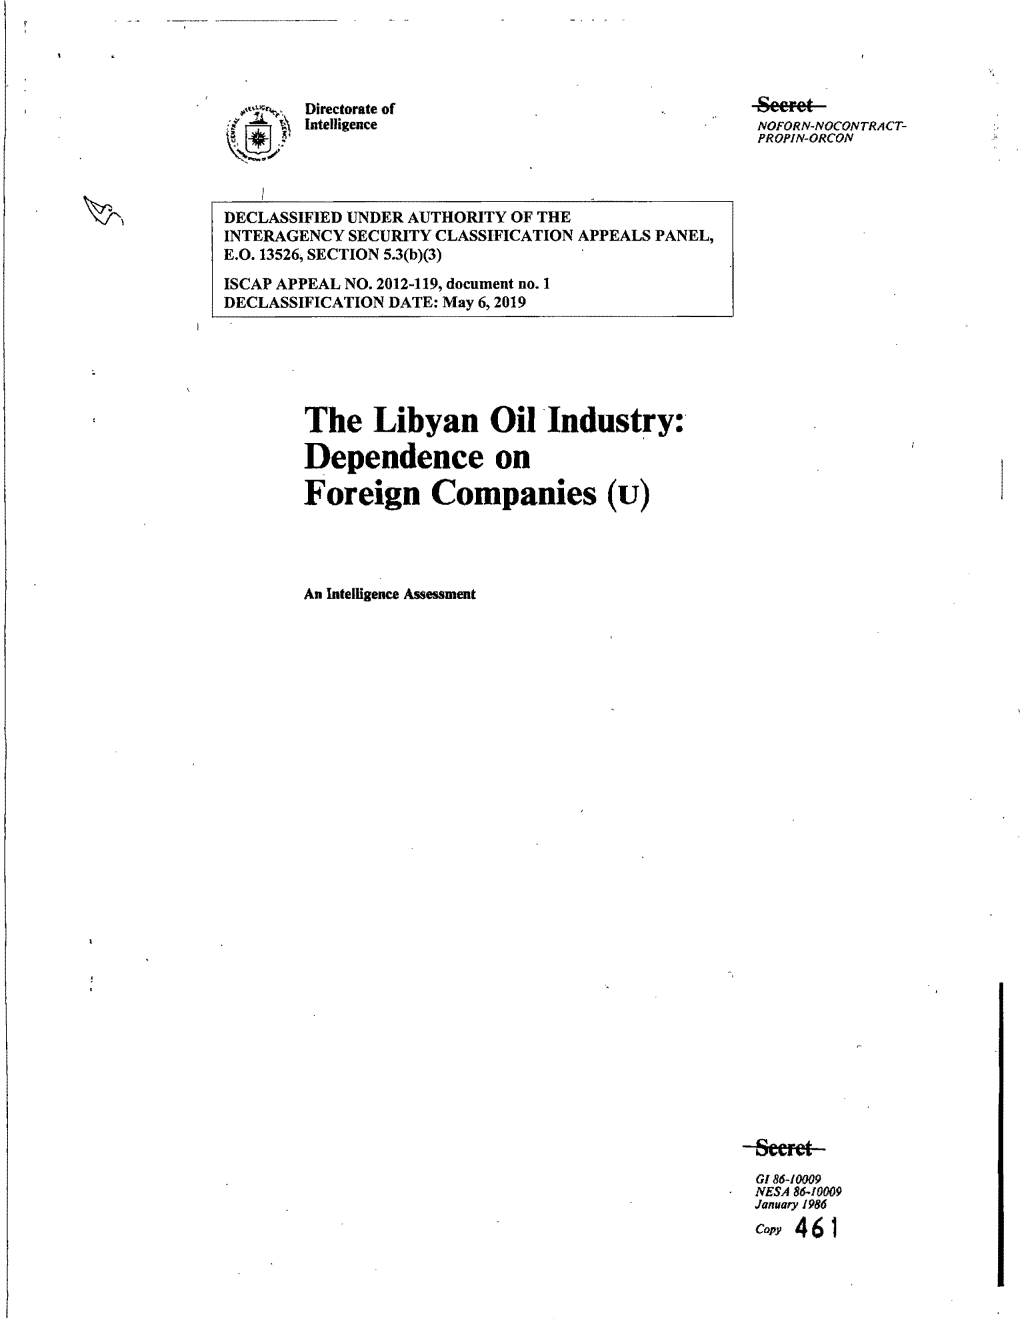 The Libyan Oil Industry: Dependence on Foreign Companies (U)